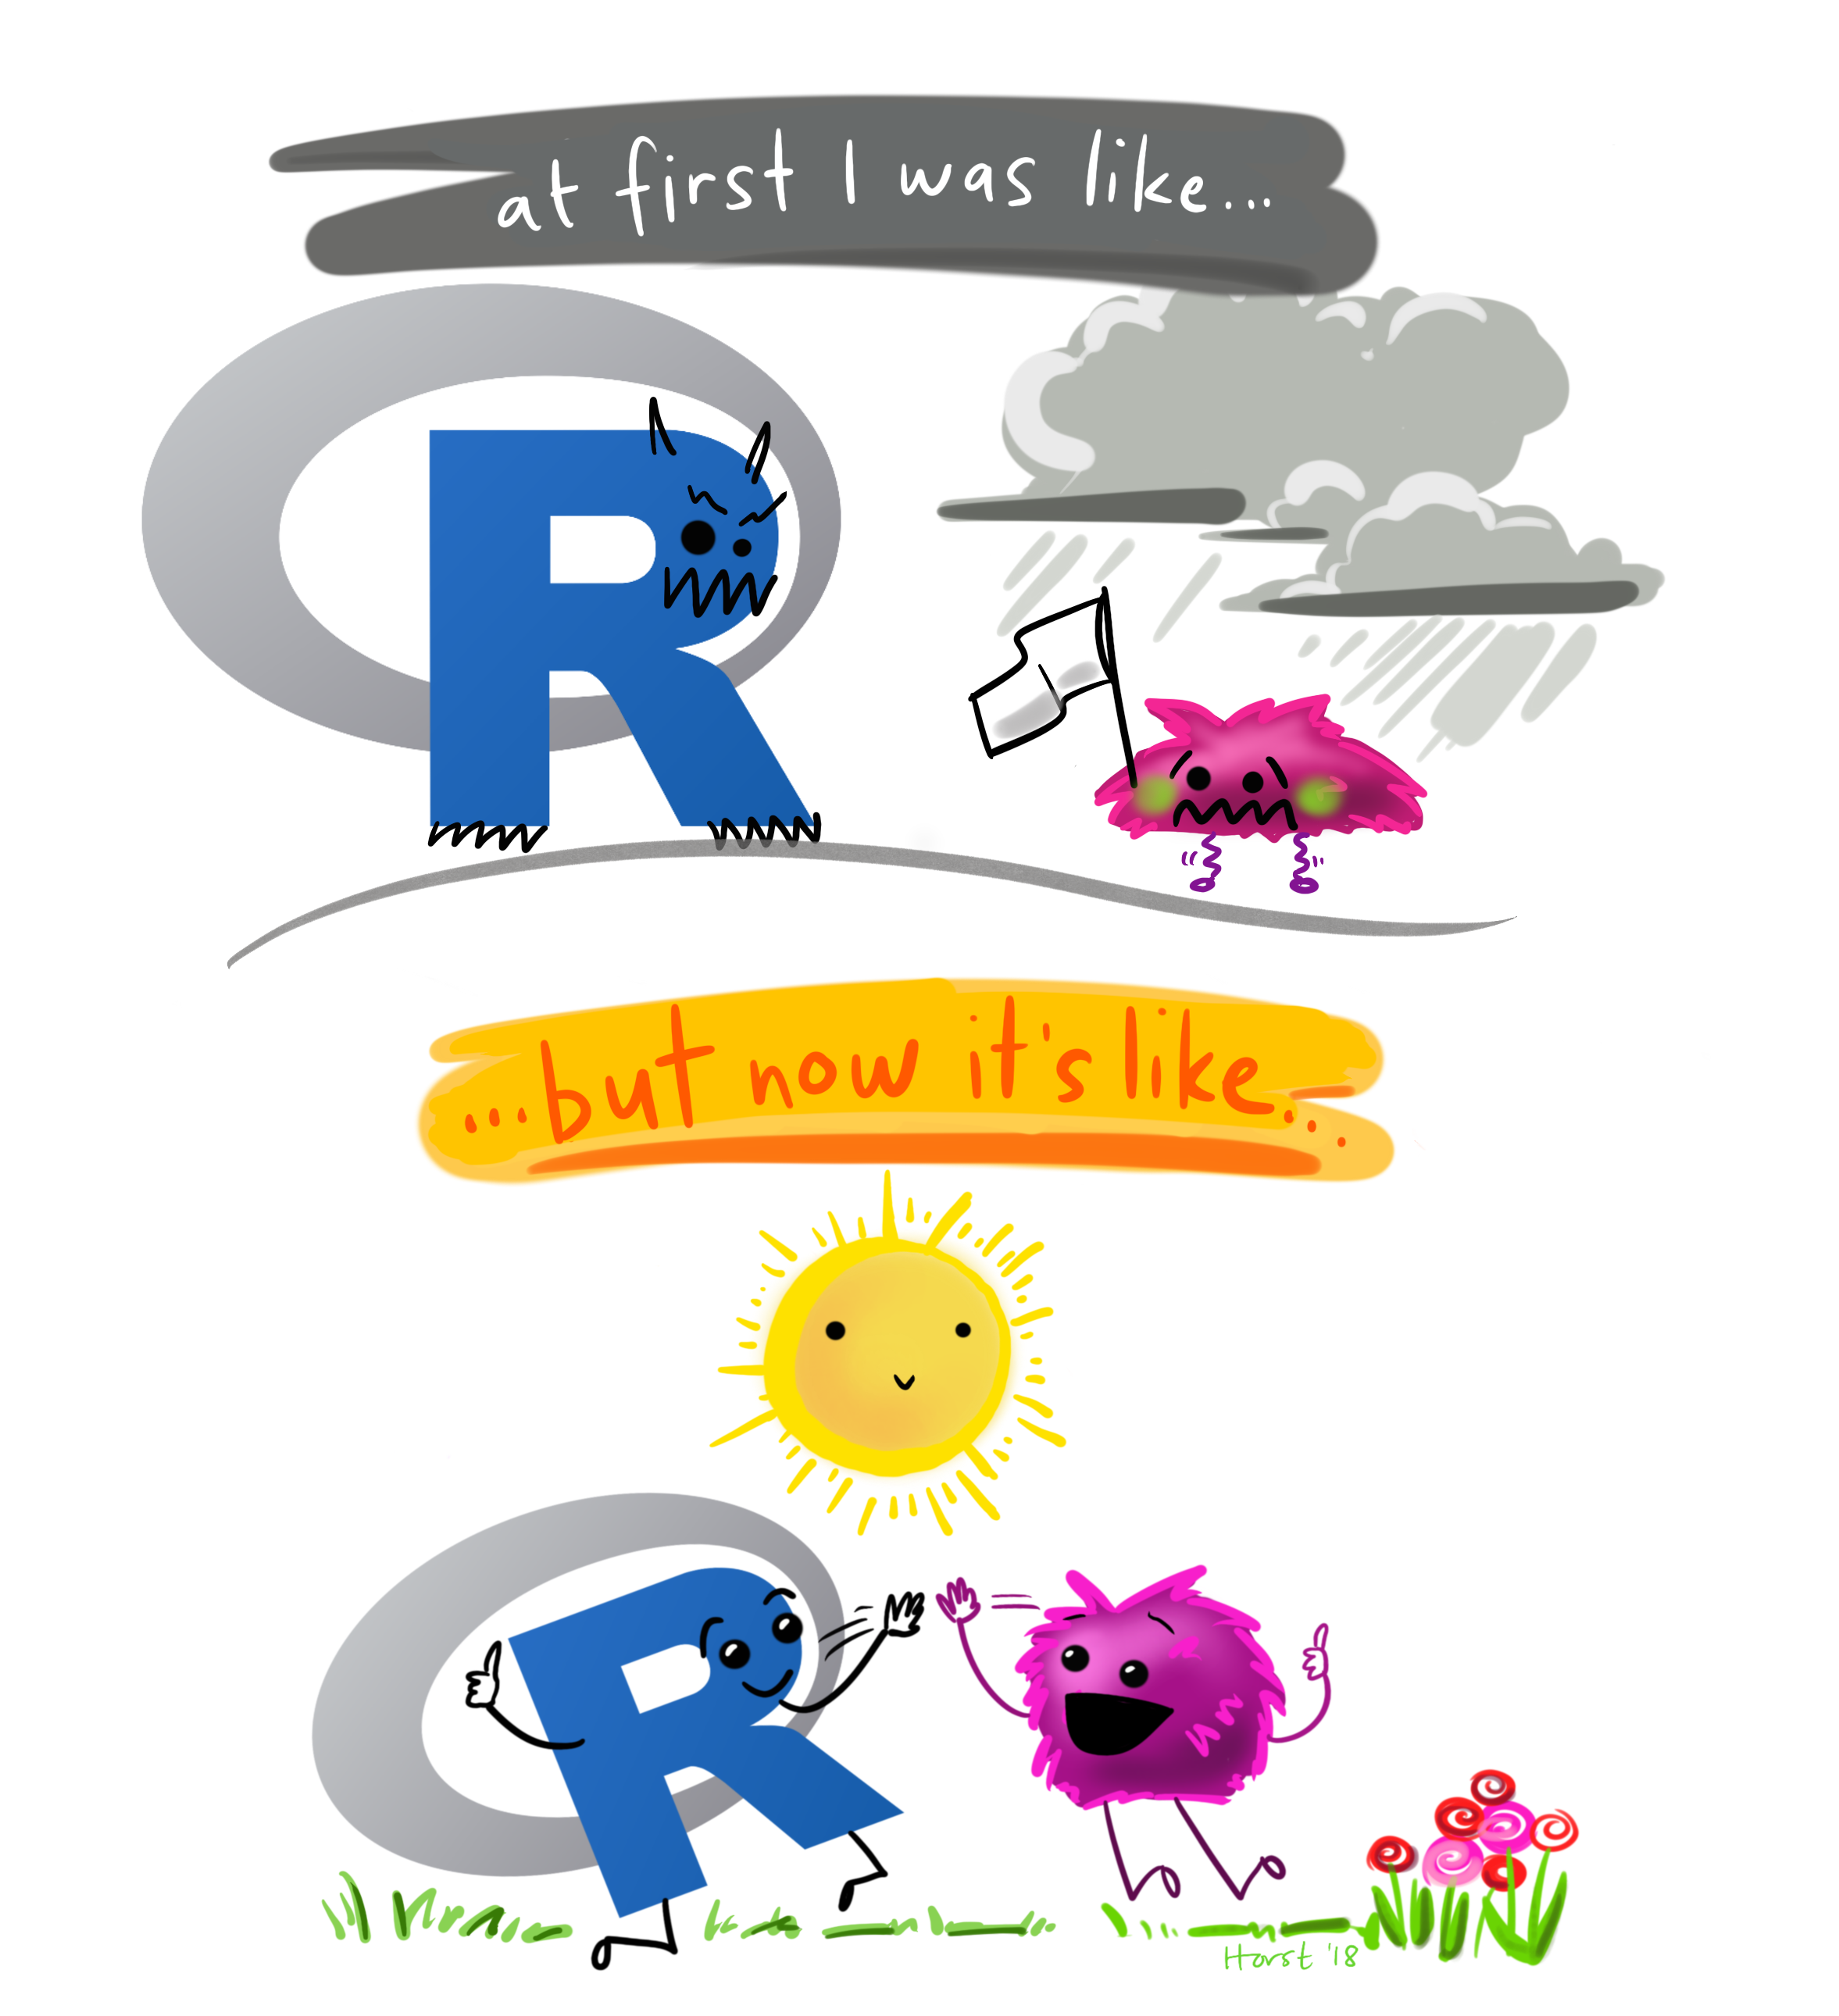 A digital cartoon with two illustrations: the top shows the R-logo with a scary face, and a small scared little fuzzy monster holding up a white flag in surrender while under a dark stormcloud. The text above says “at first I was like…” The lower cartoon is a friendly, smiling R-logo jumping up to give a happy fuzzy monster a high-five under a smiling sun and next to colorful flowers. The text above the bottom illustration reads “but now it’s like…”